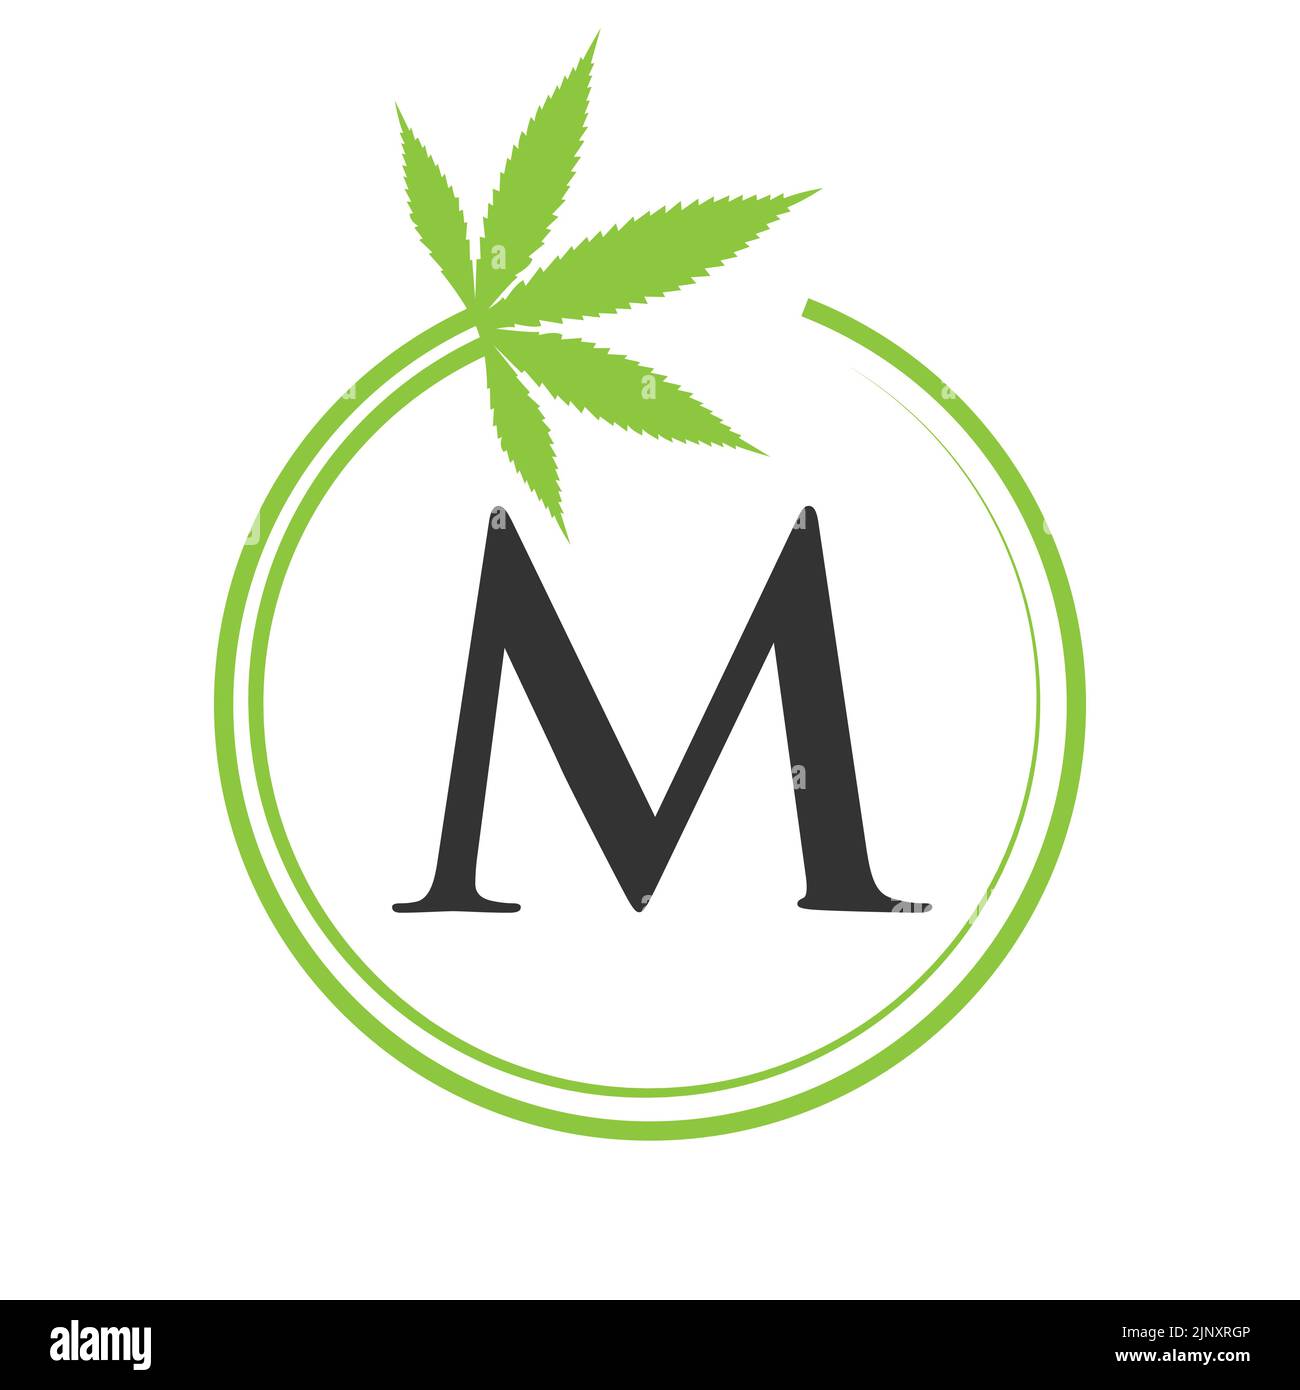 Cannabis Marijuana Logo on Letter M Concept For Health and Medical Therapy. Marijuana, Cannabis Sign Template Stock Vector